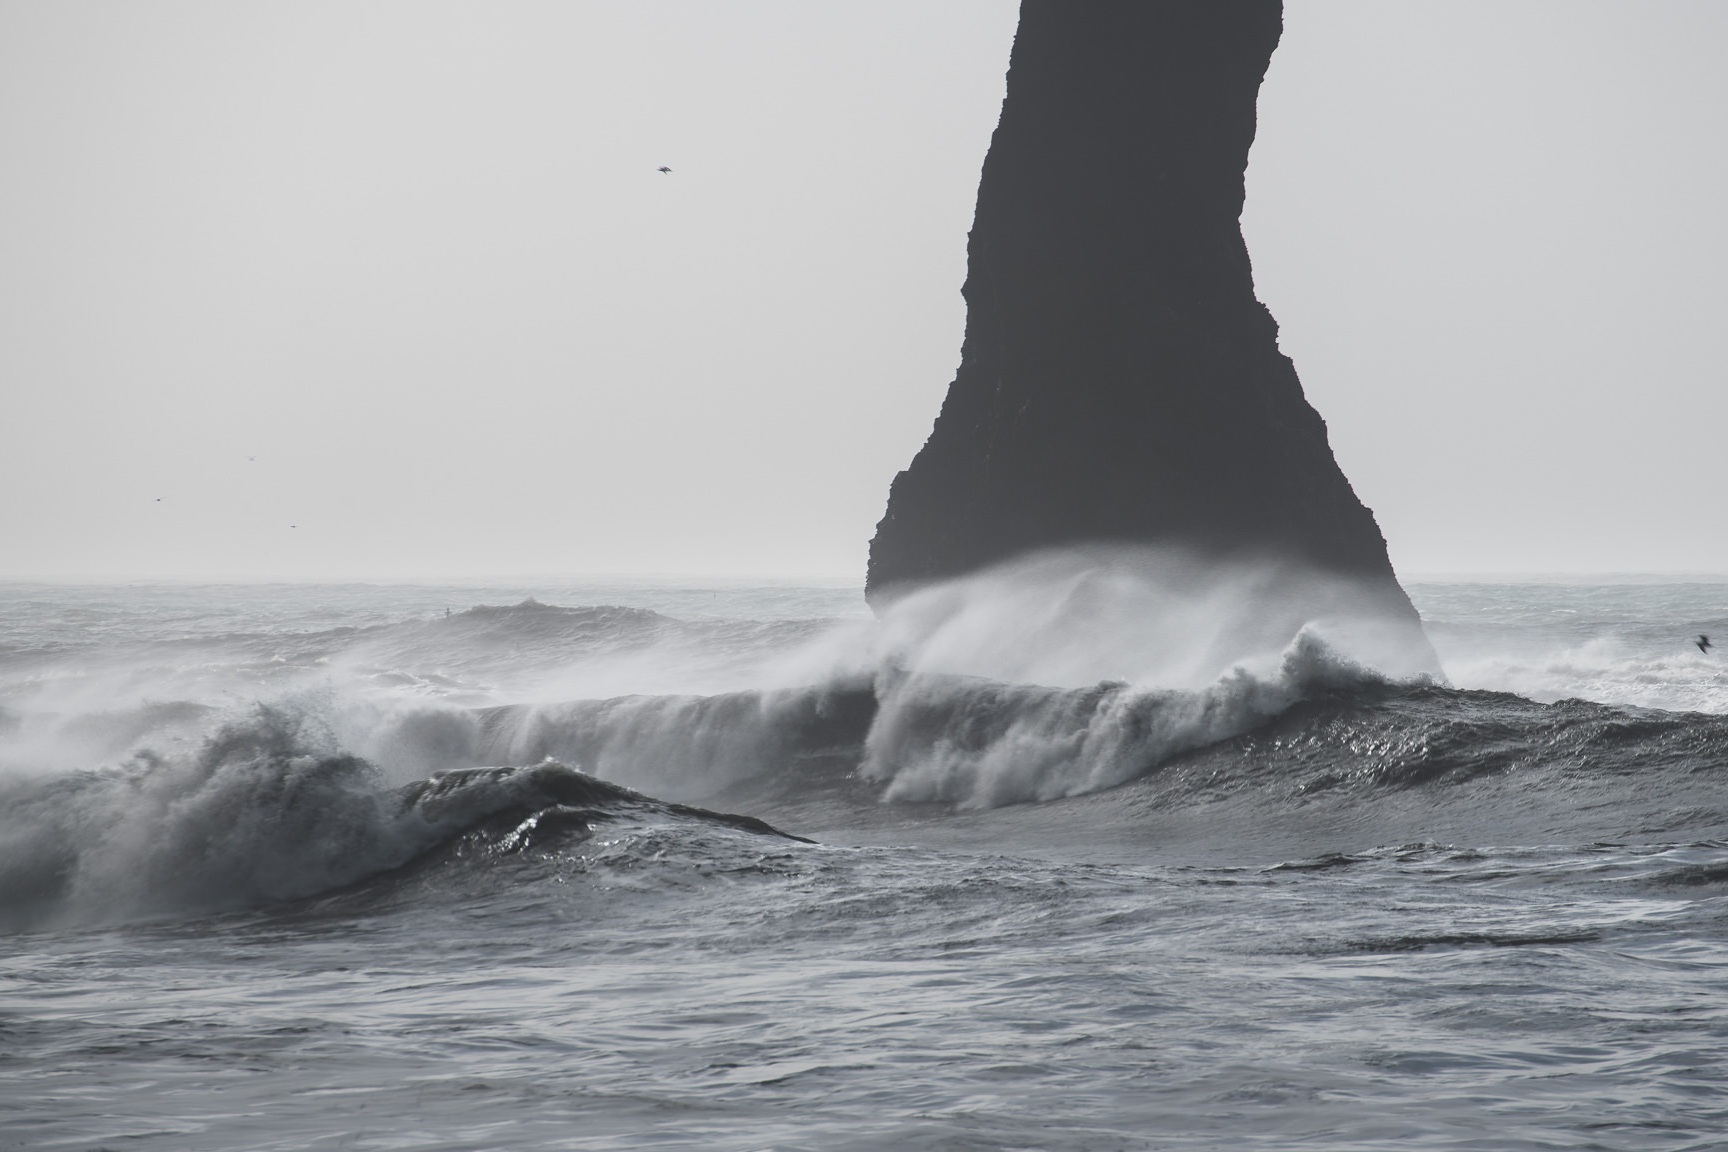 Another from Reynisfjara